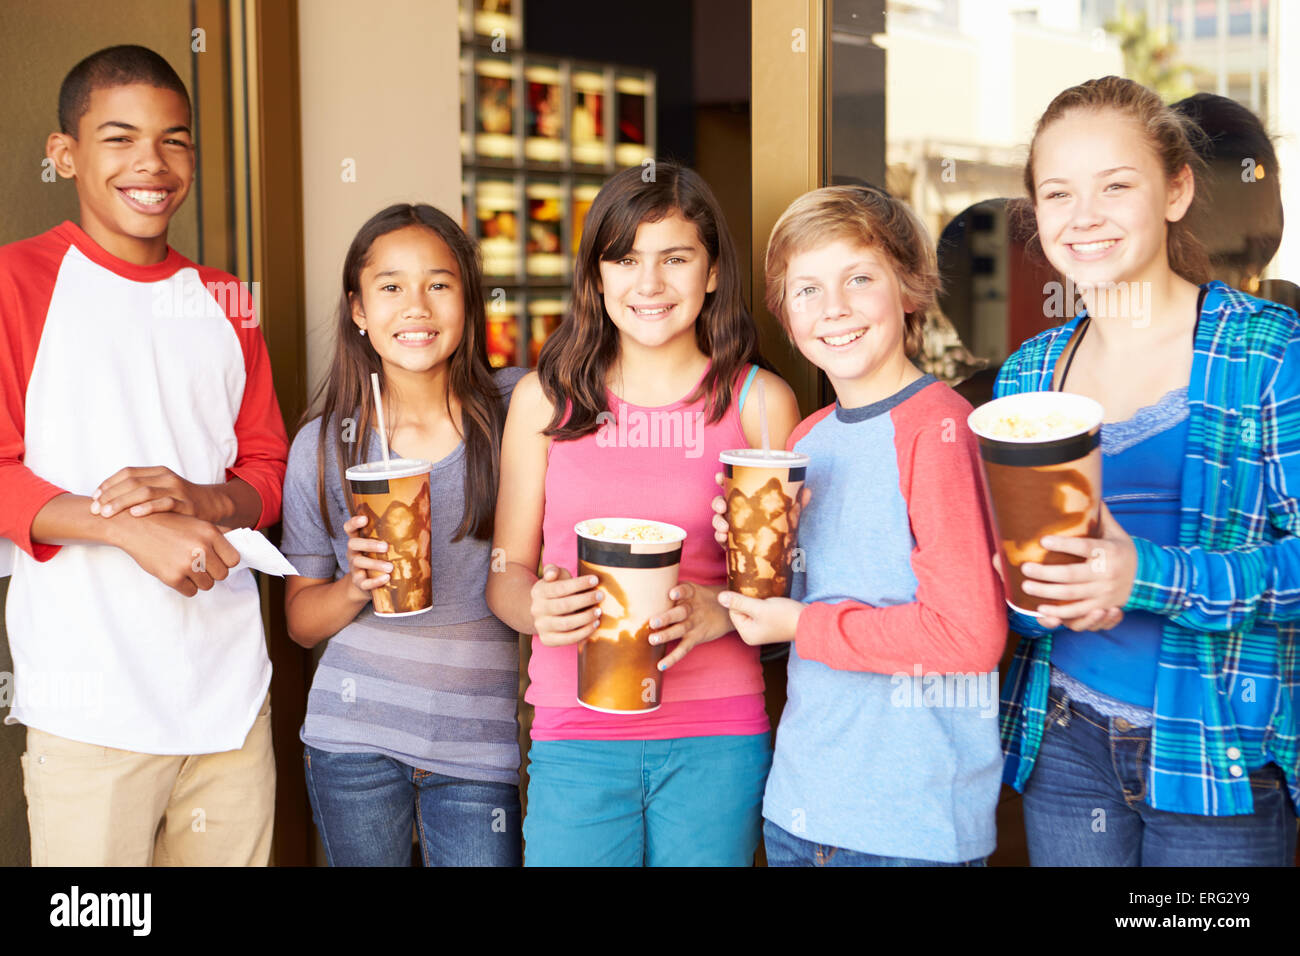 Group Of Children Standing Outside Cinema Together Stock Photo